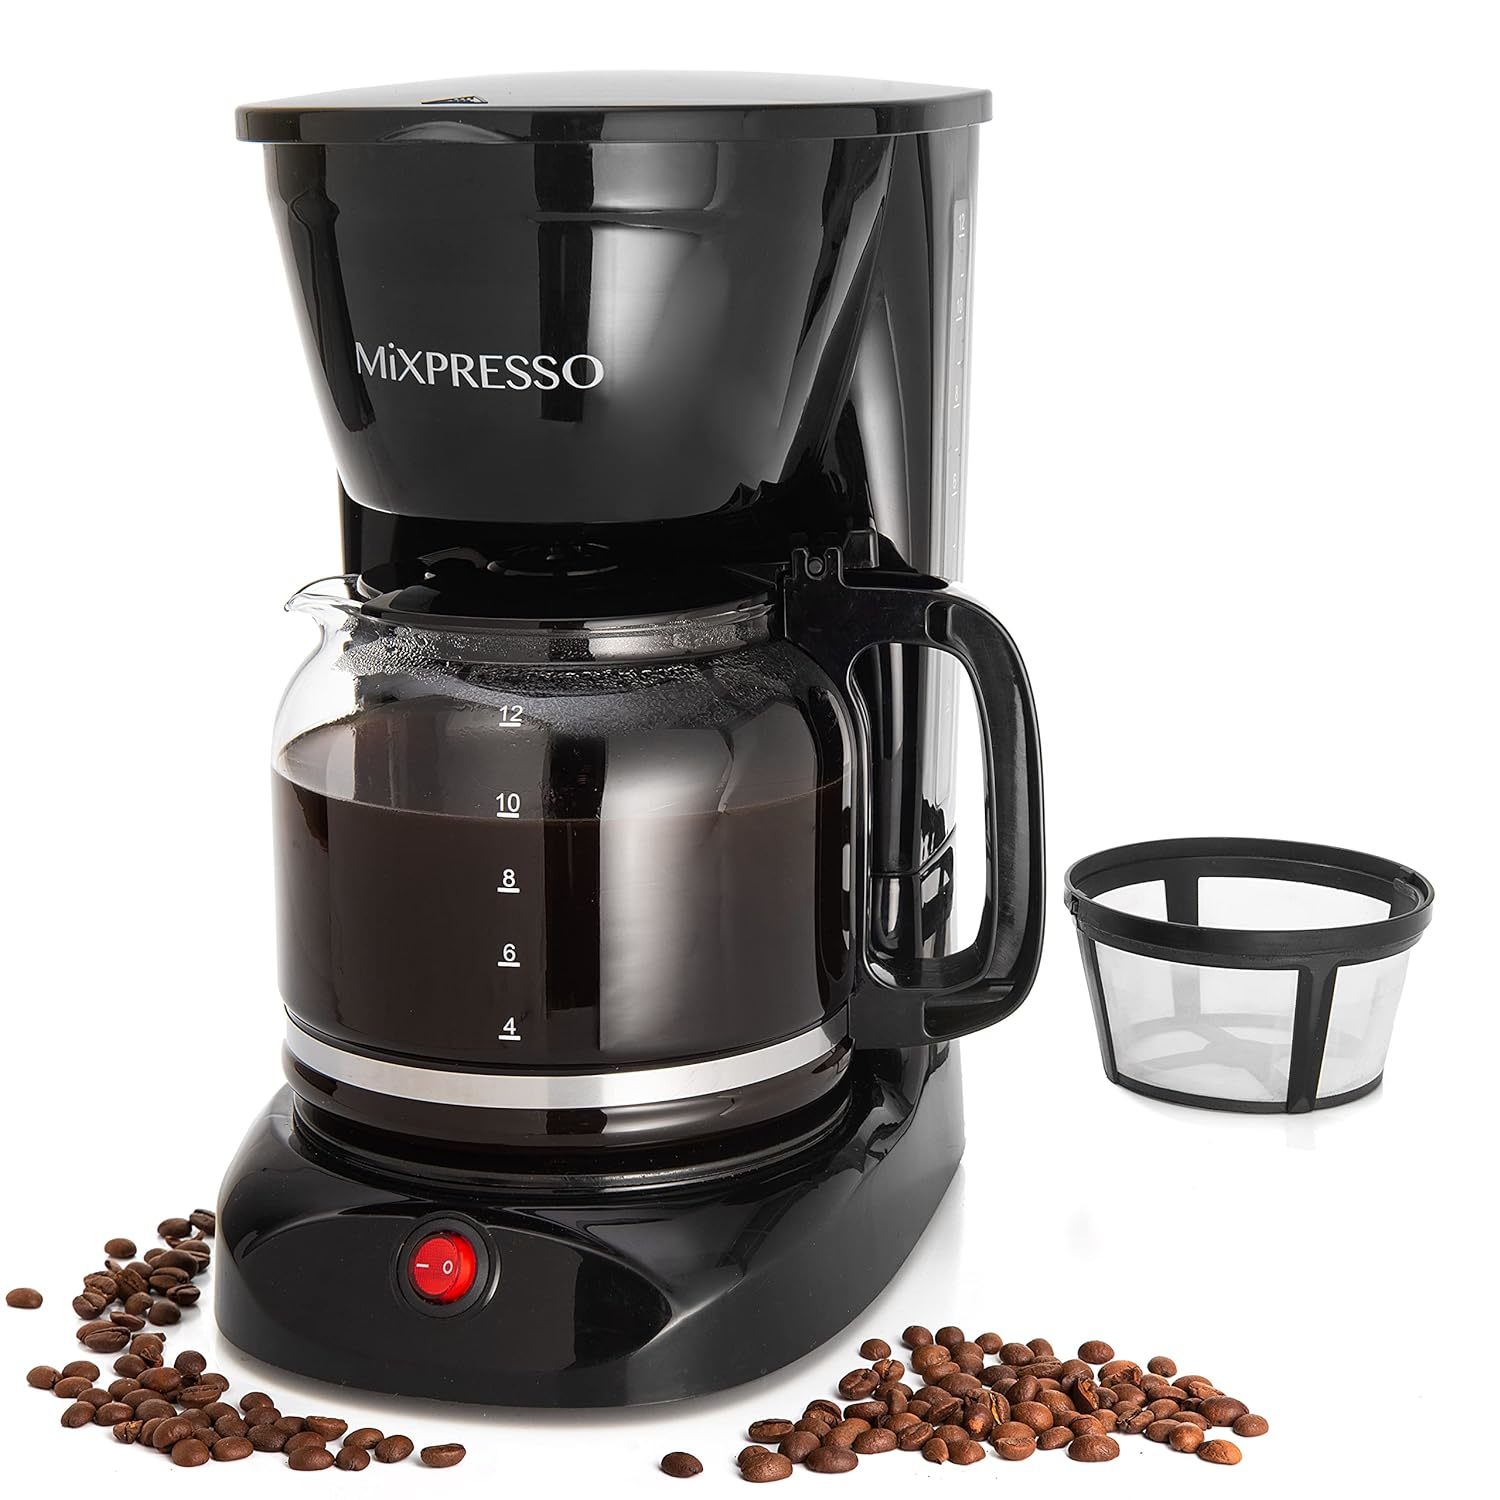 Westinghouse 220-volts Digital Programmable Coffee Maker with Permanent  Fiter and Hot Plate